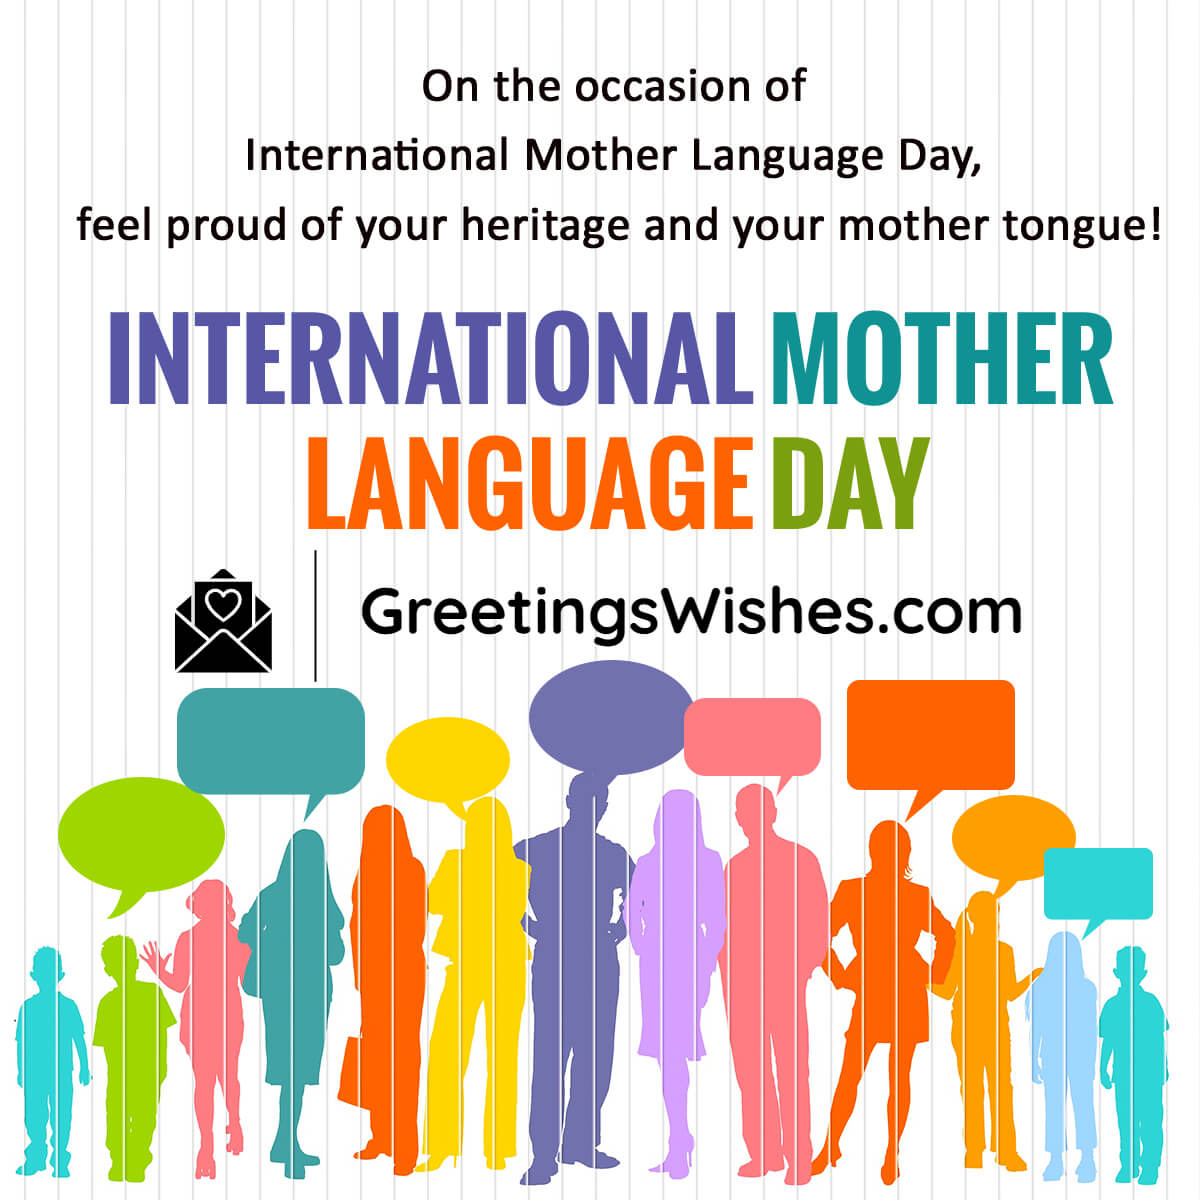 International Mother Language Day (21st February) Greetings Wishes